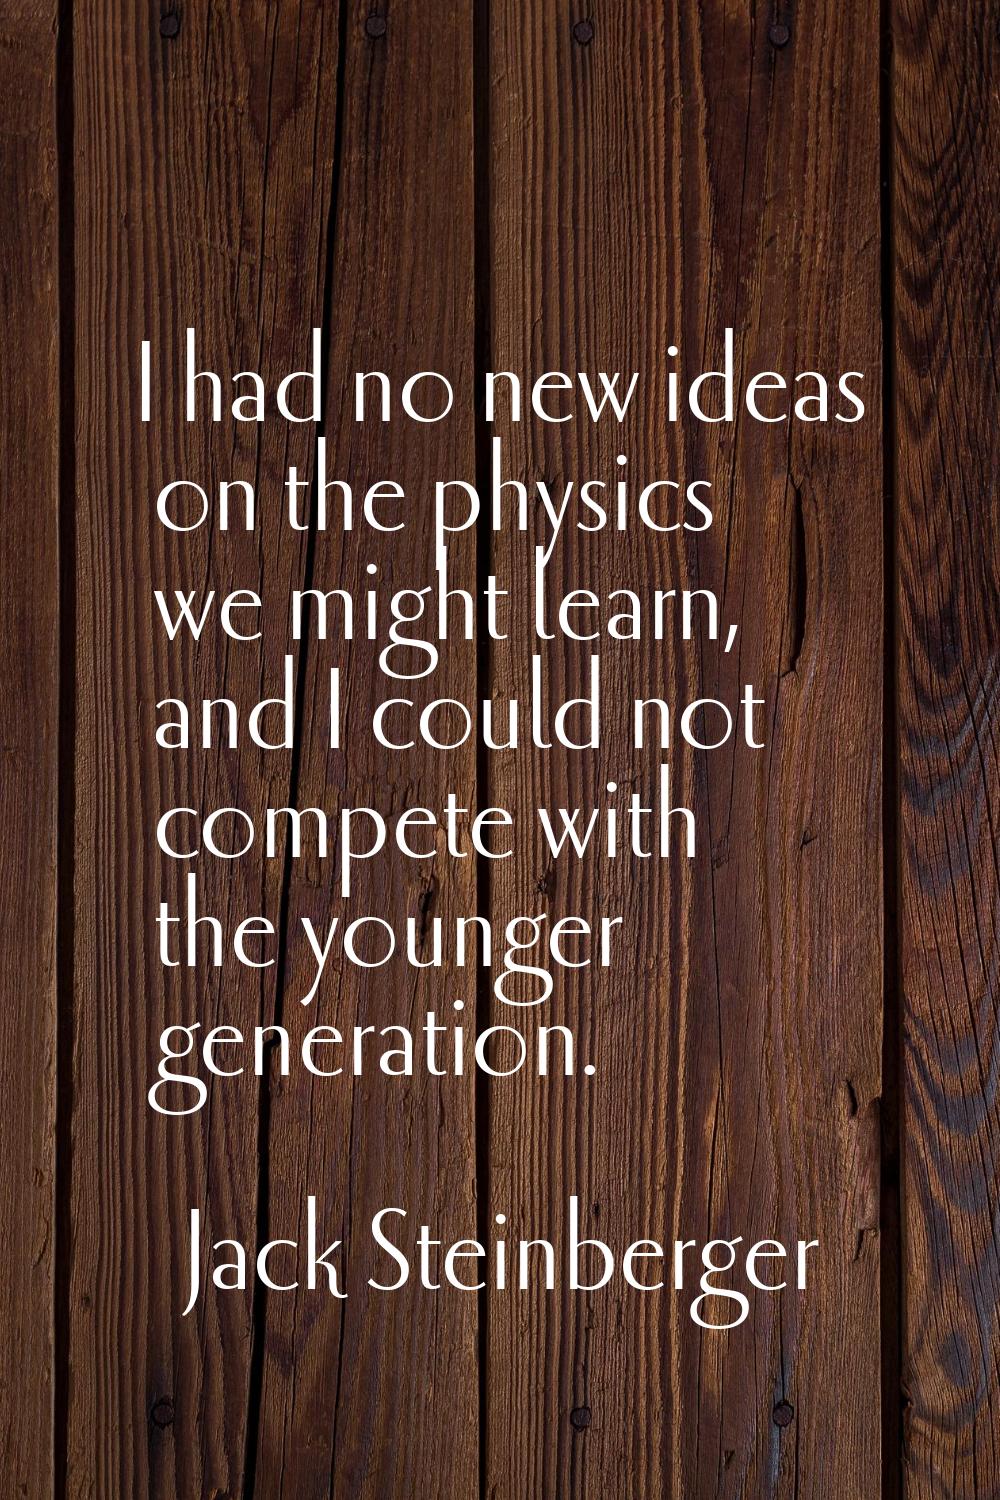 I had no new ideas on the physics we might learn, and I could not compete with the younger generati